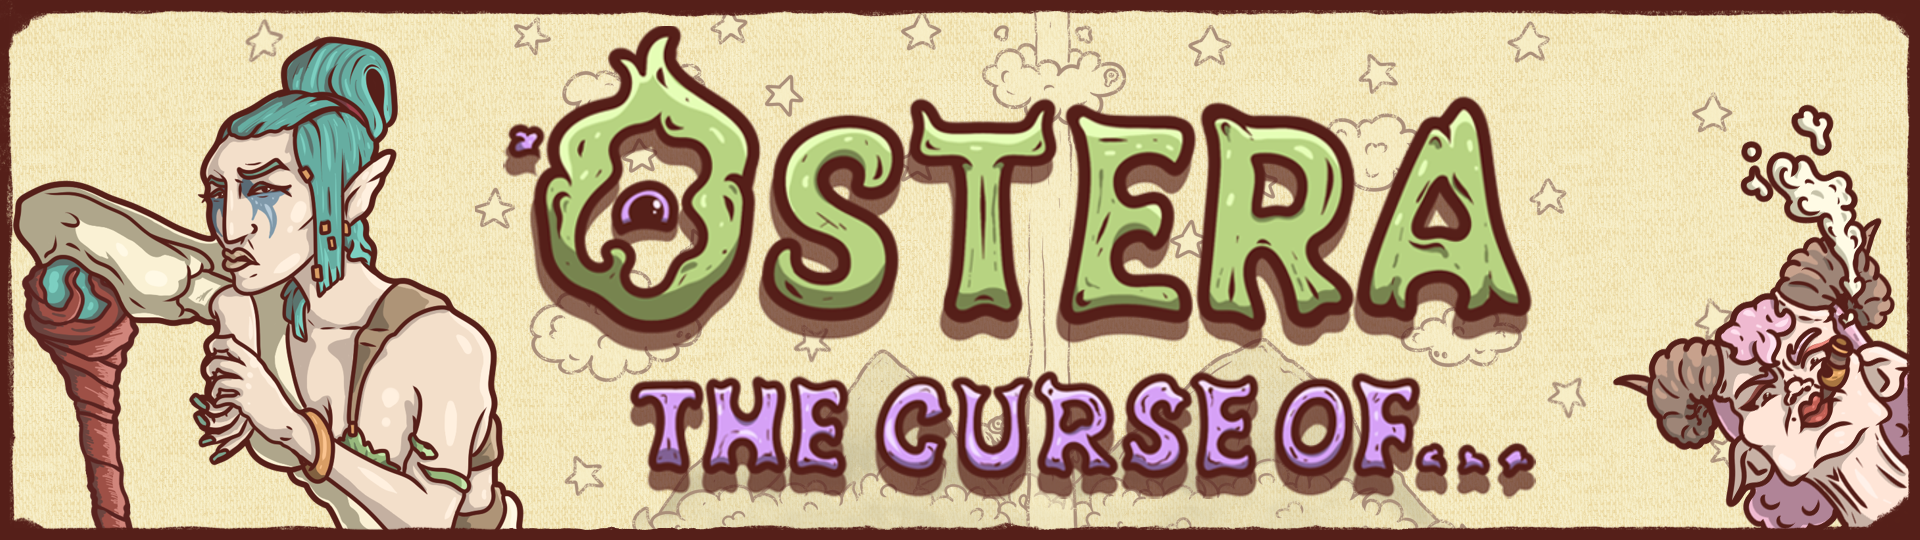 Ostera: The curse of...